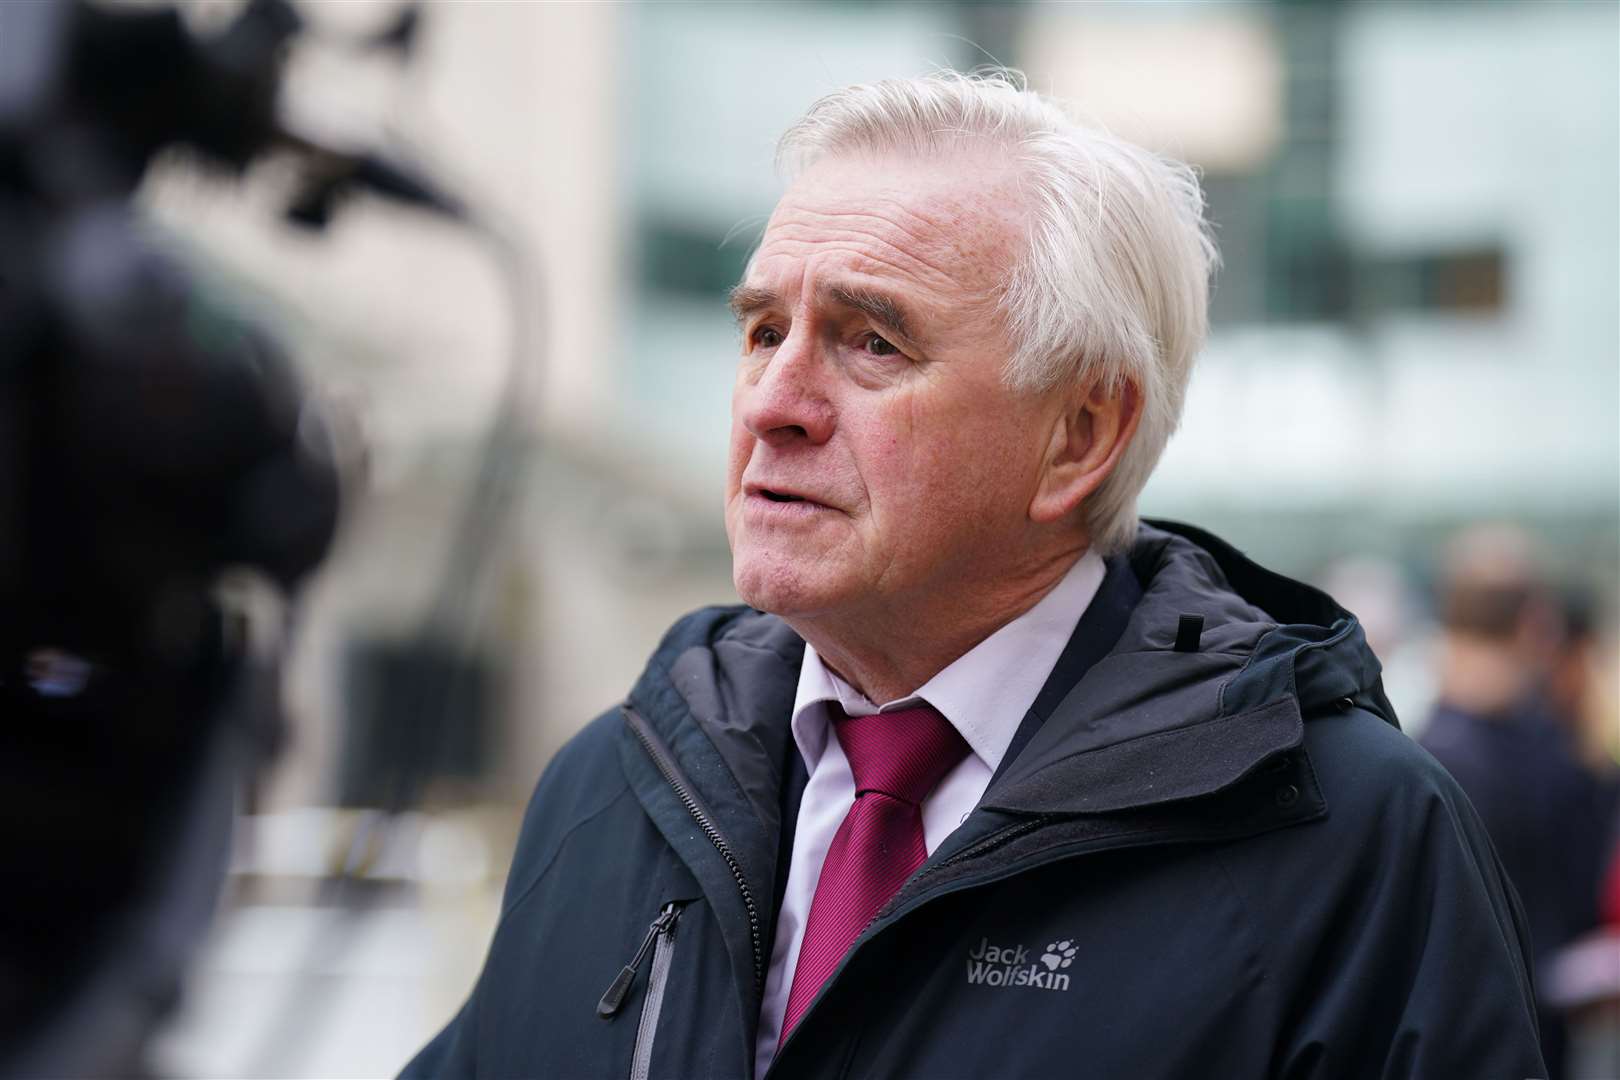 Former shadow chancellor John McDonnell has been critical of Labour’s treatment of left-wing candidates (James Manning/PA)